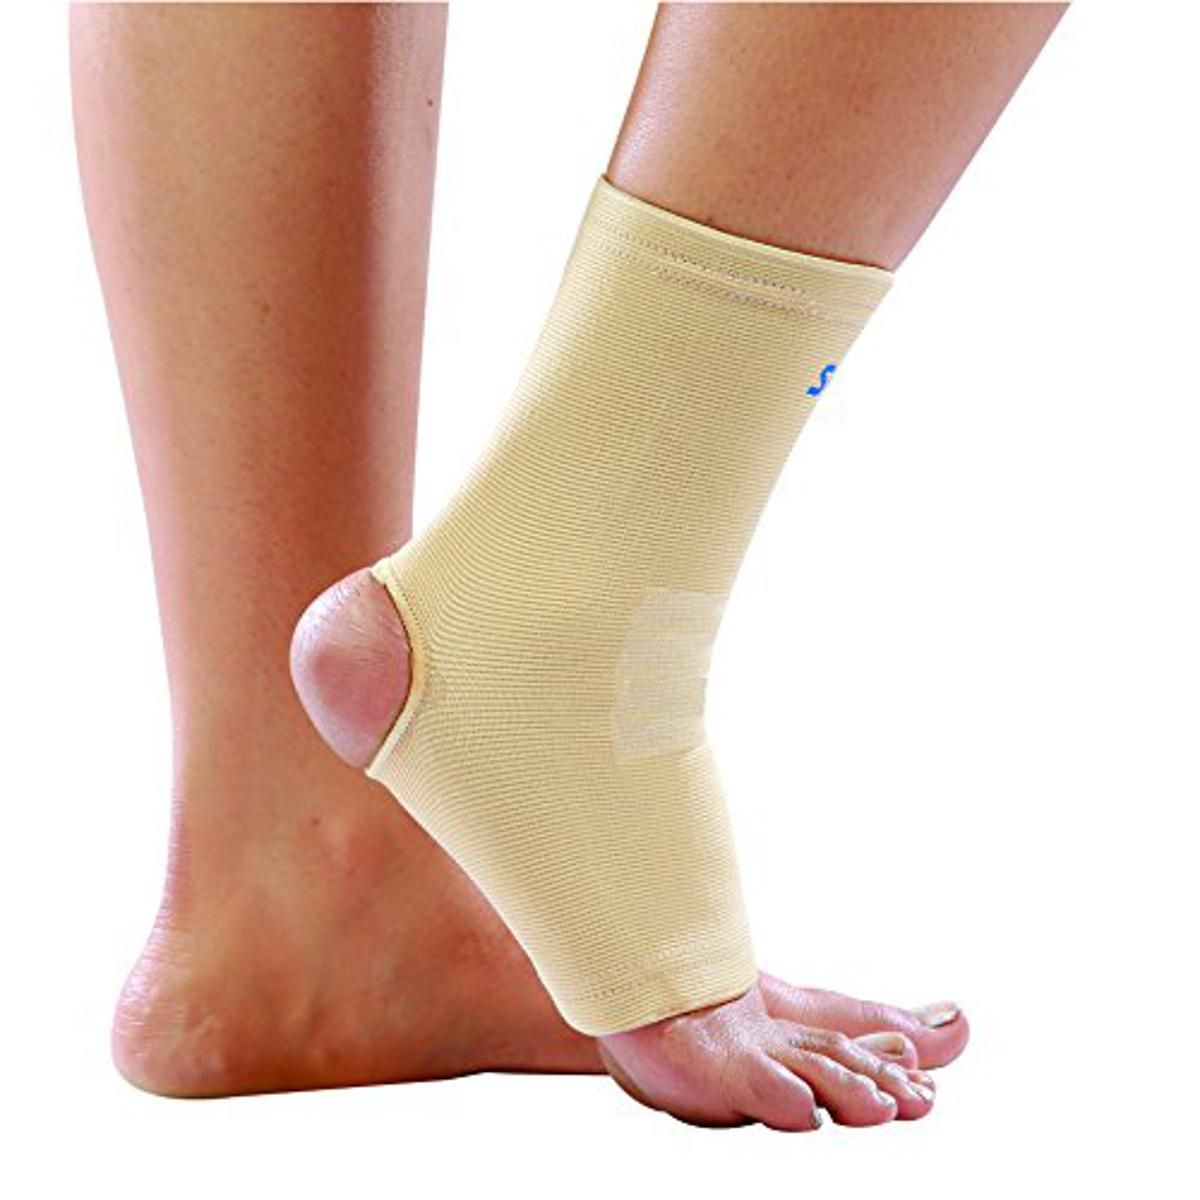 Buy Sego Ankle Support Large, 1 Count Online